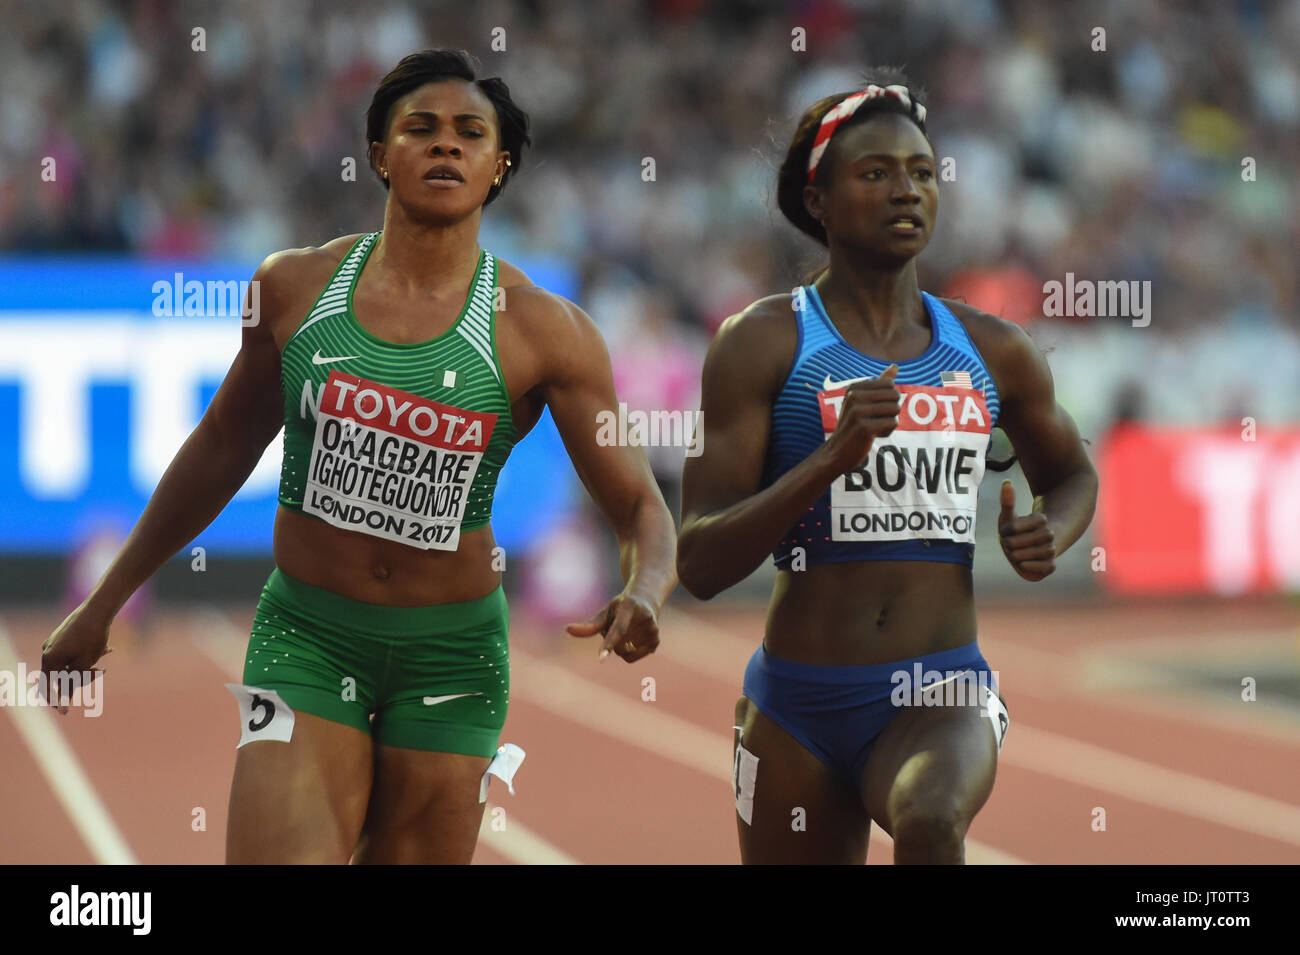 London, UK. 06th Aug, 2017. Blessing OKAGBARE-IGHOTEGUONOR, Nigeria, and Tori BOWIE, USA; during 100 meter semifinal in London on August 6, 2017 at the 2017 IAAF World Championships athletics. Credit: Ulrik Pedersen/Alamy Live News Stock Photo